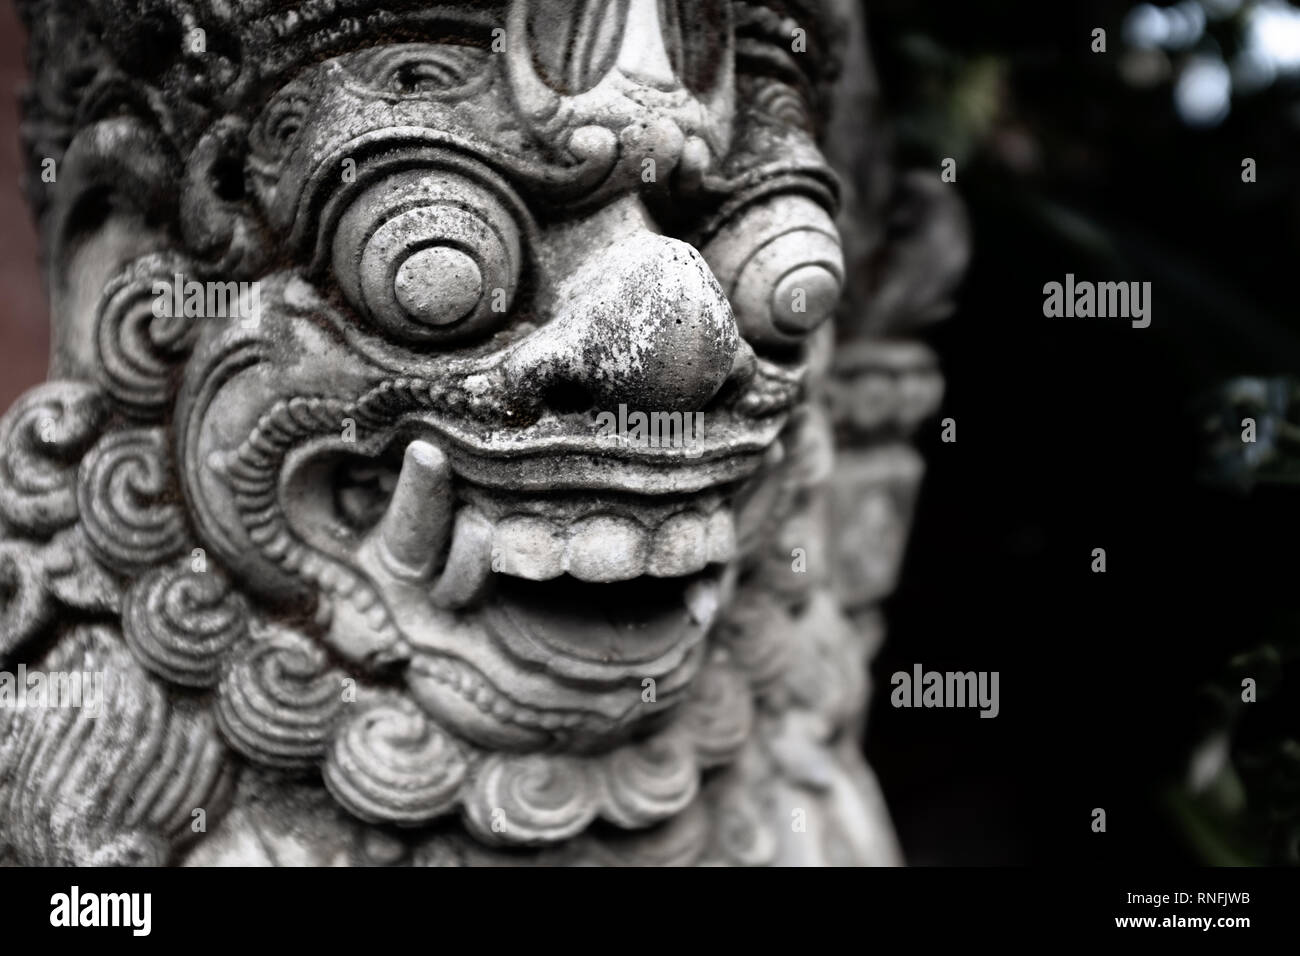 Close-up on a gate guardian (Dvarapala) in front of a balinese temple in Ubud, Bali, Indonesia Stock Photo